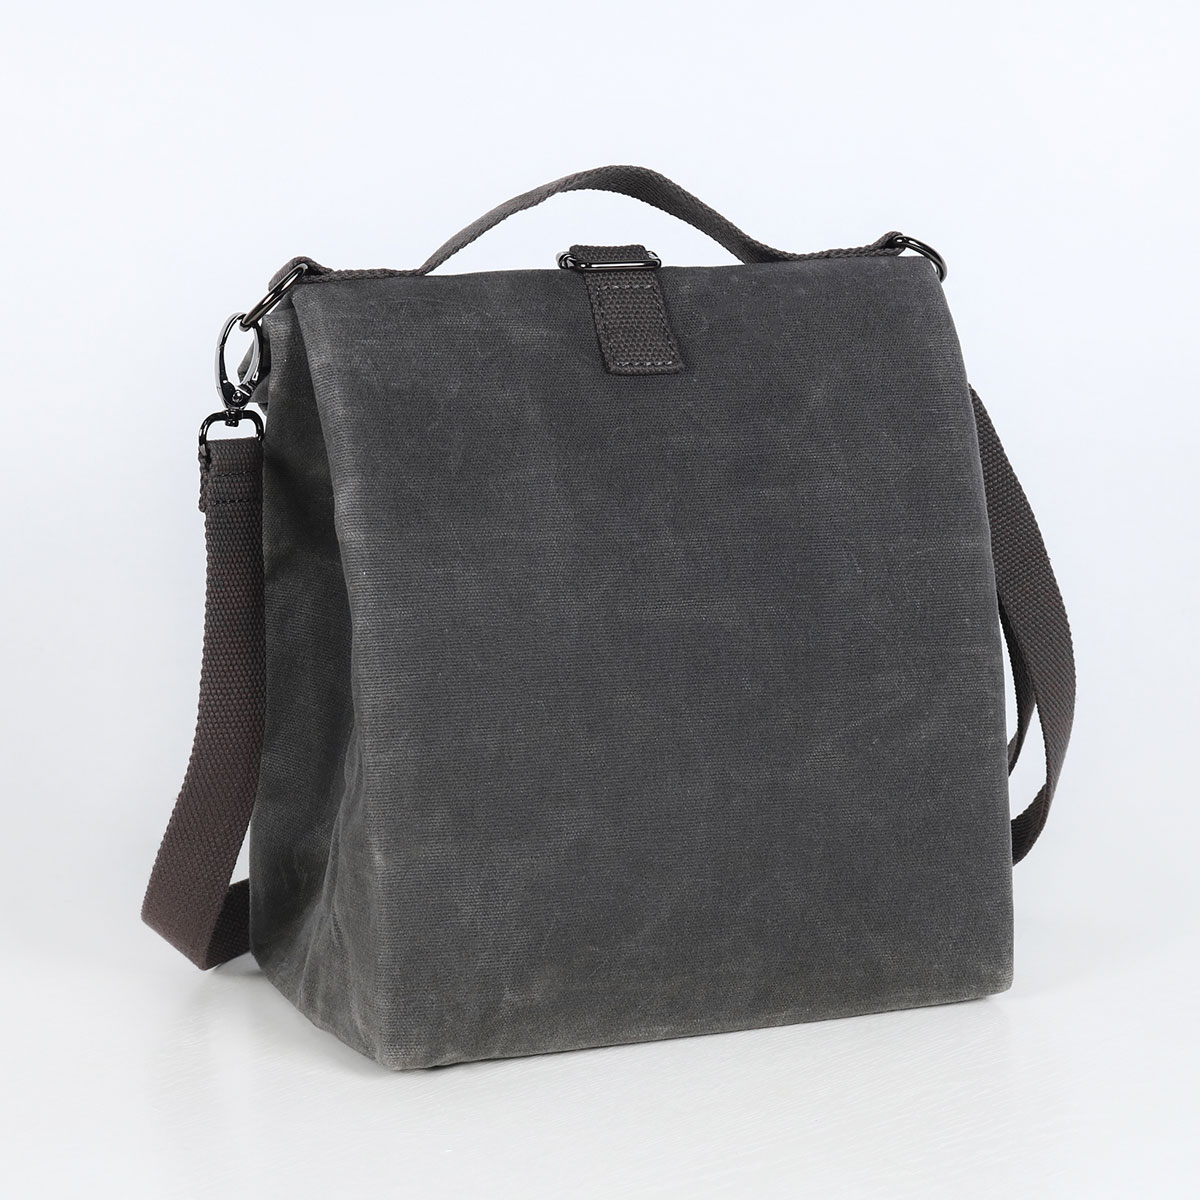 The Original Waxed Canvas Lunch Bag, Handmade with Certified Organic Cotton  and Hand Waxed with Beeswax, Foldable, Stiff Material, Plastic-Free